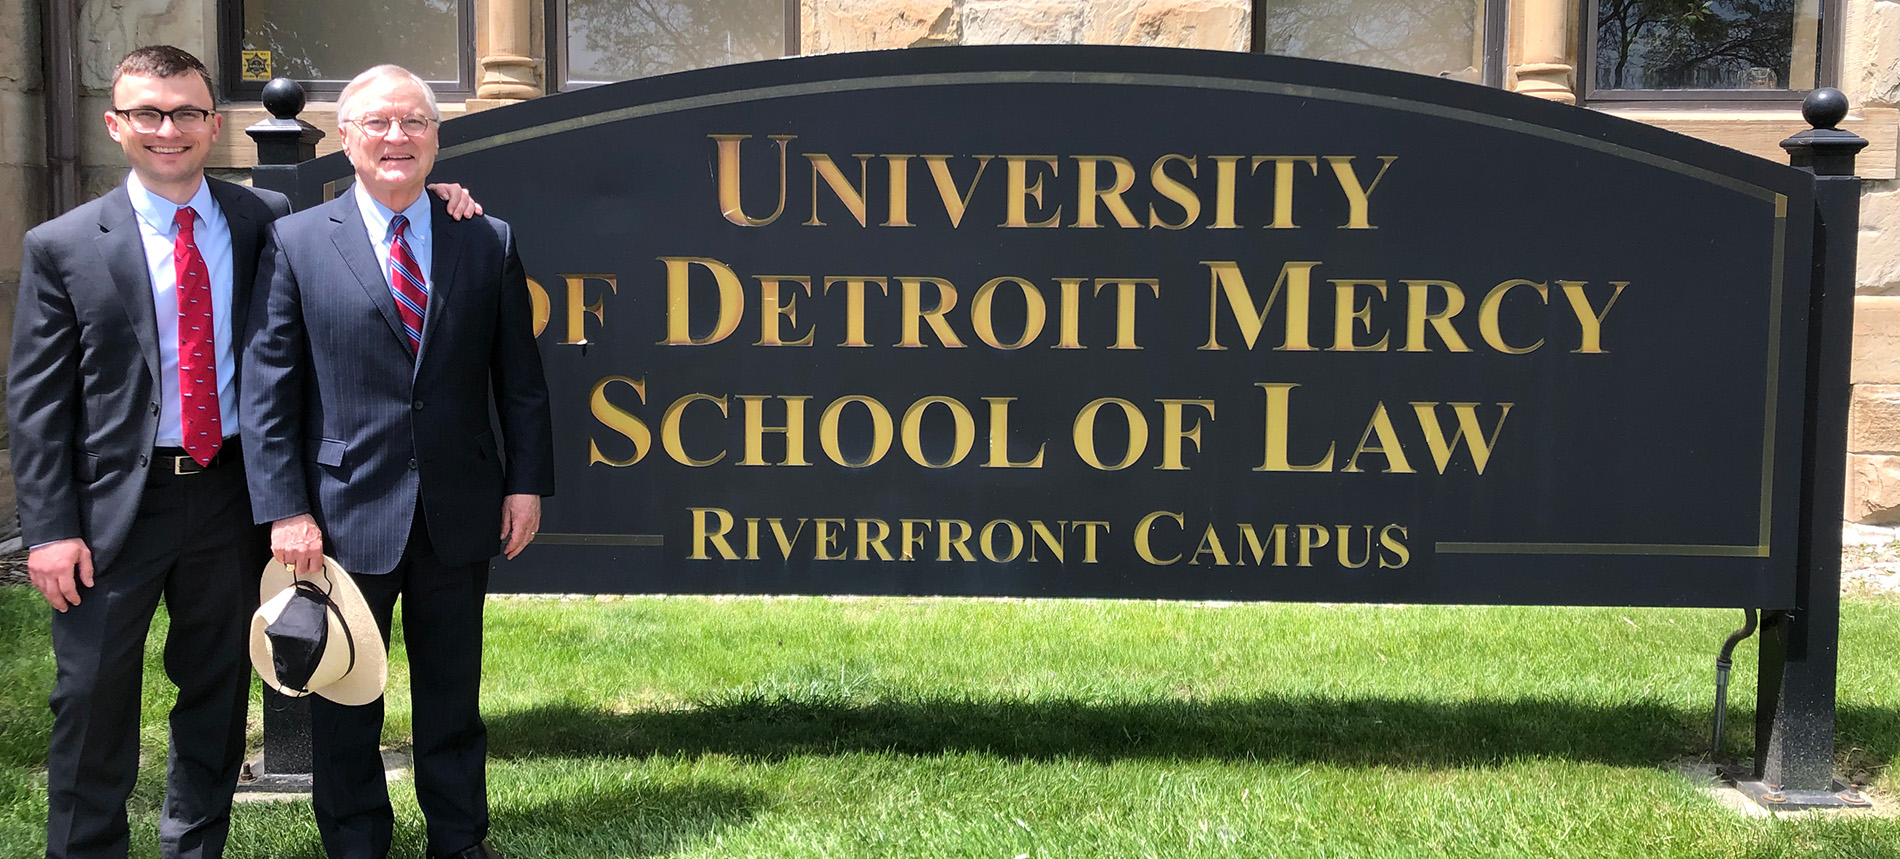 Kevin Lynch stands next to his father and the Detroit Mercy School of Law Riverfront Campus sign during a campus tour.